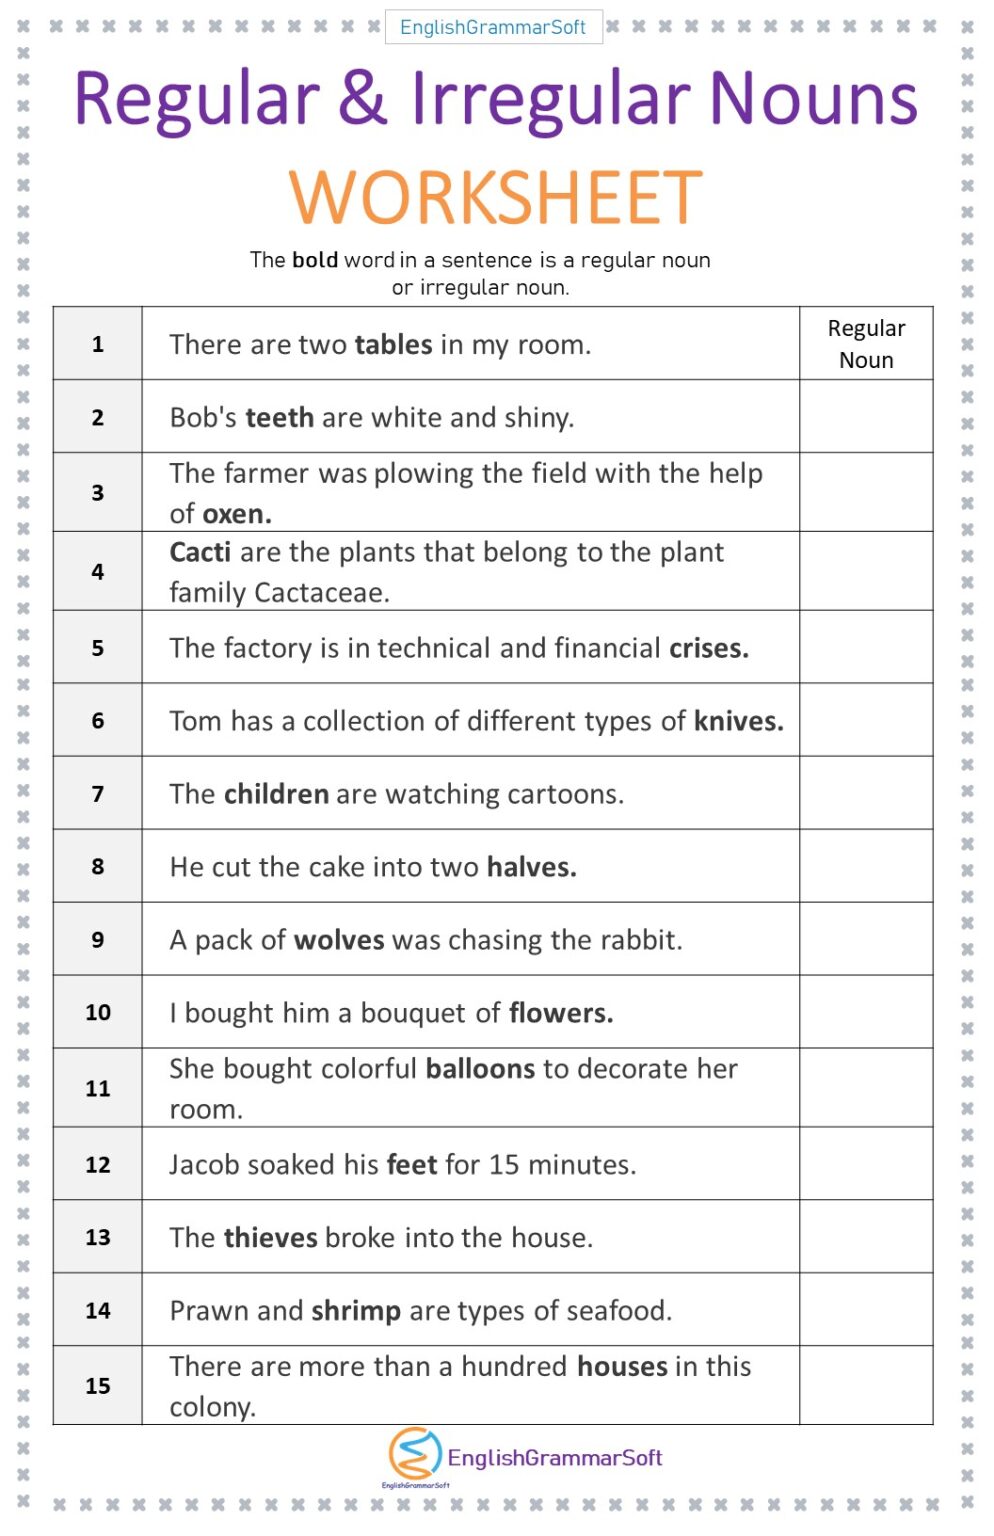 Give Two Examples Of Regular And Irregular Nouns